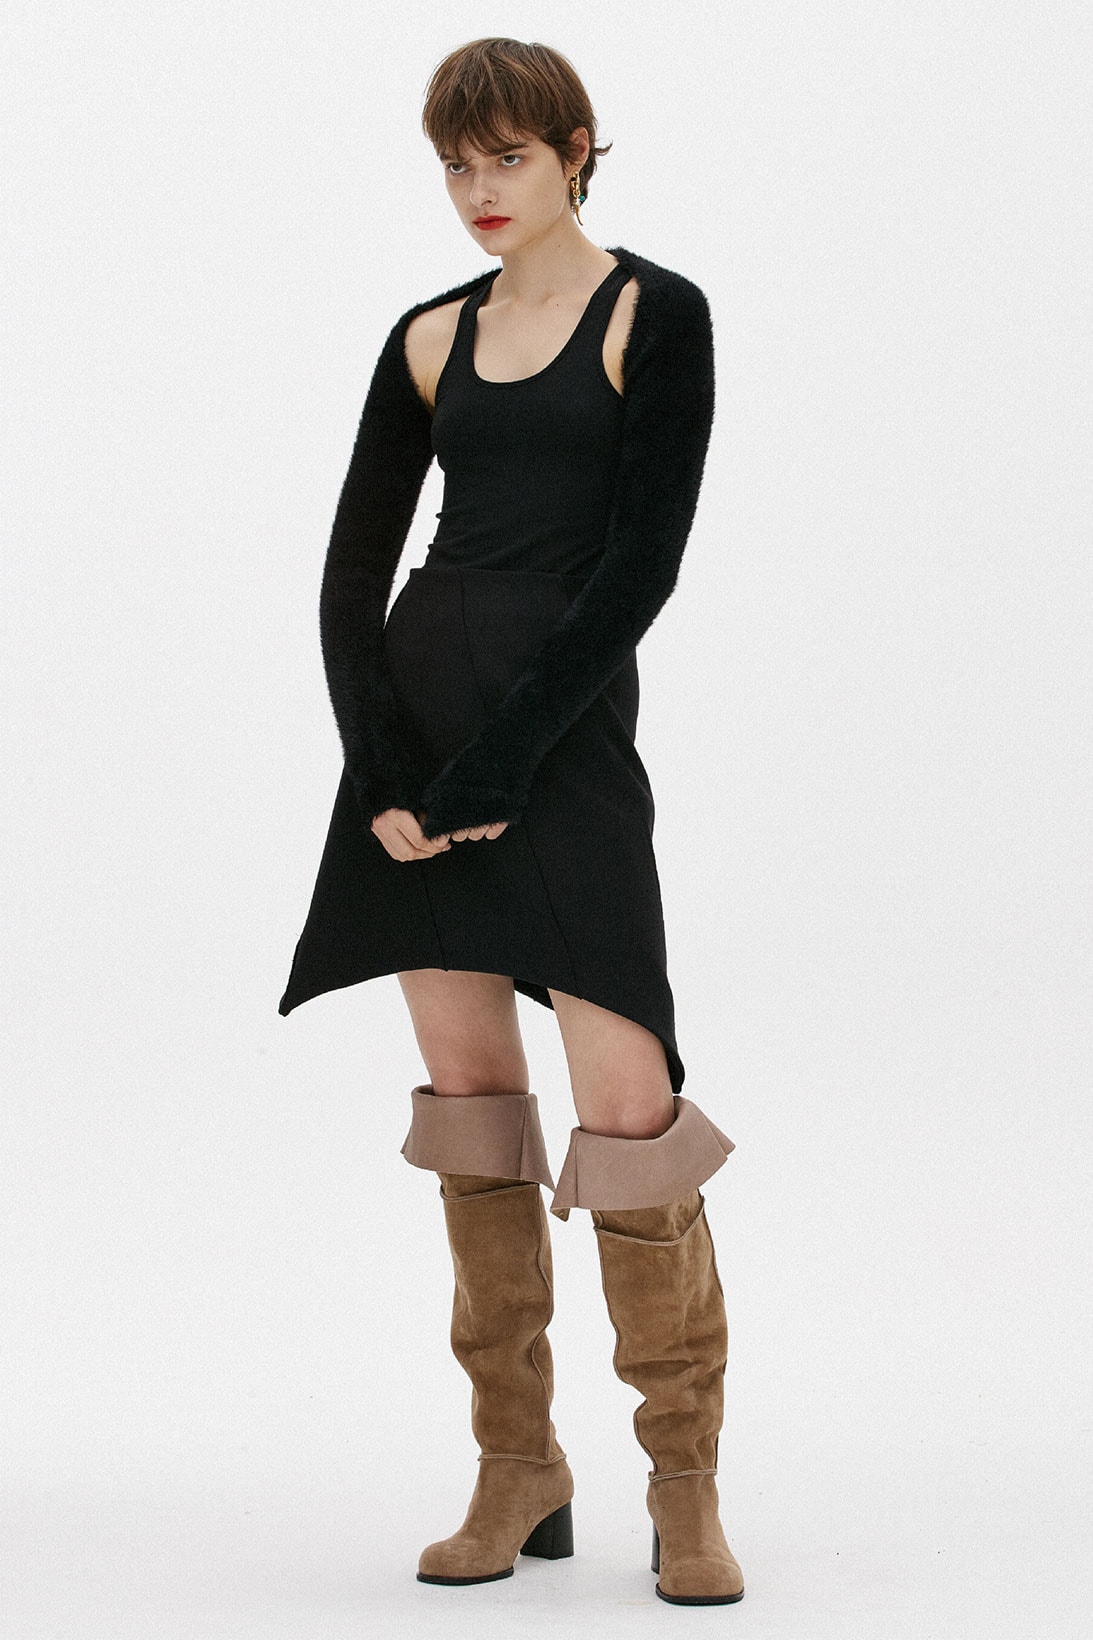 TheOpen Product Winter Holiday Collection Balaclavas Knitwear Dresses Release Where to buy